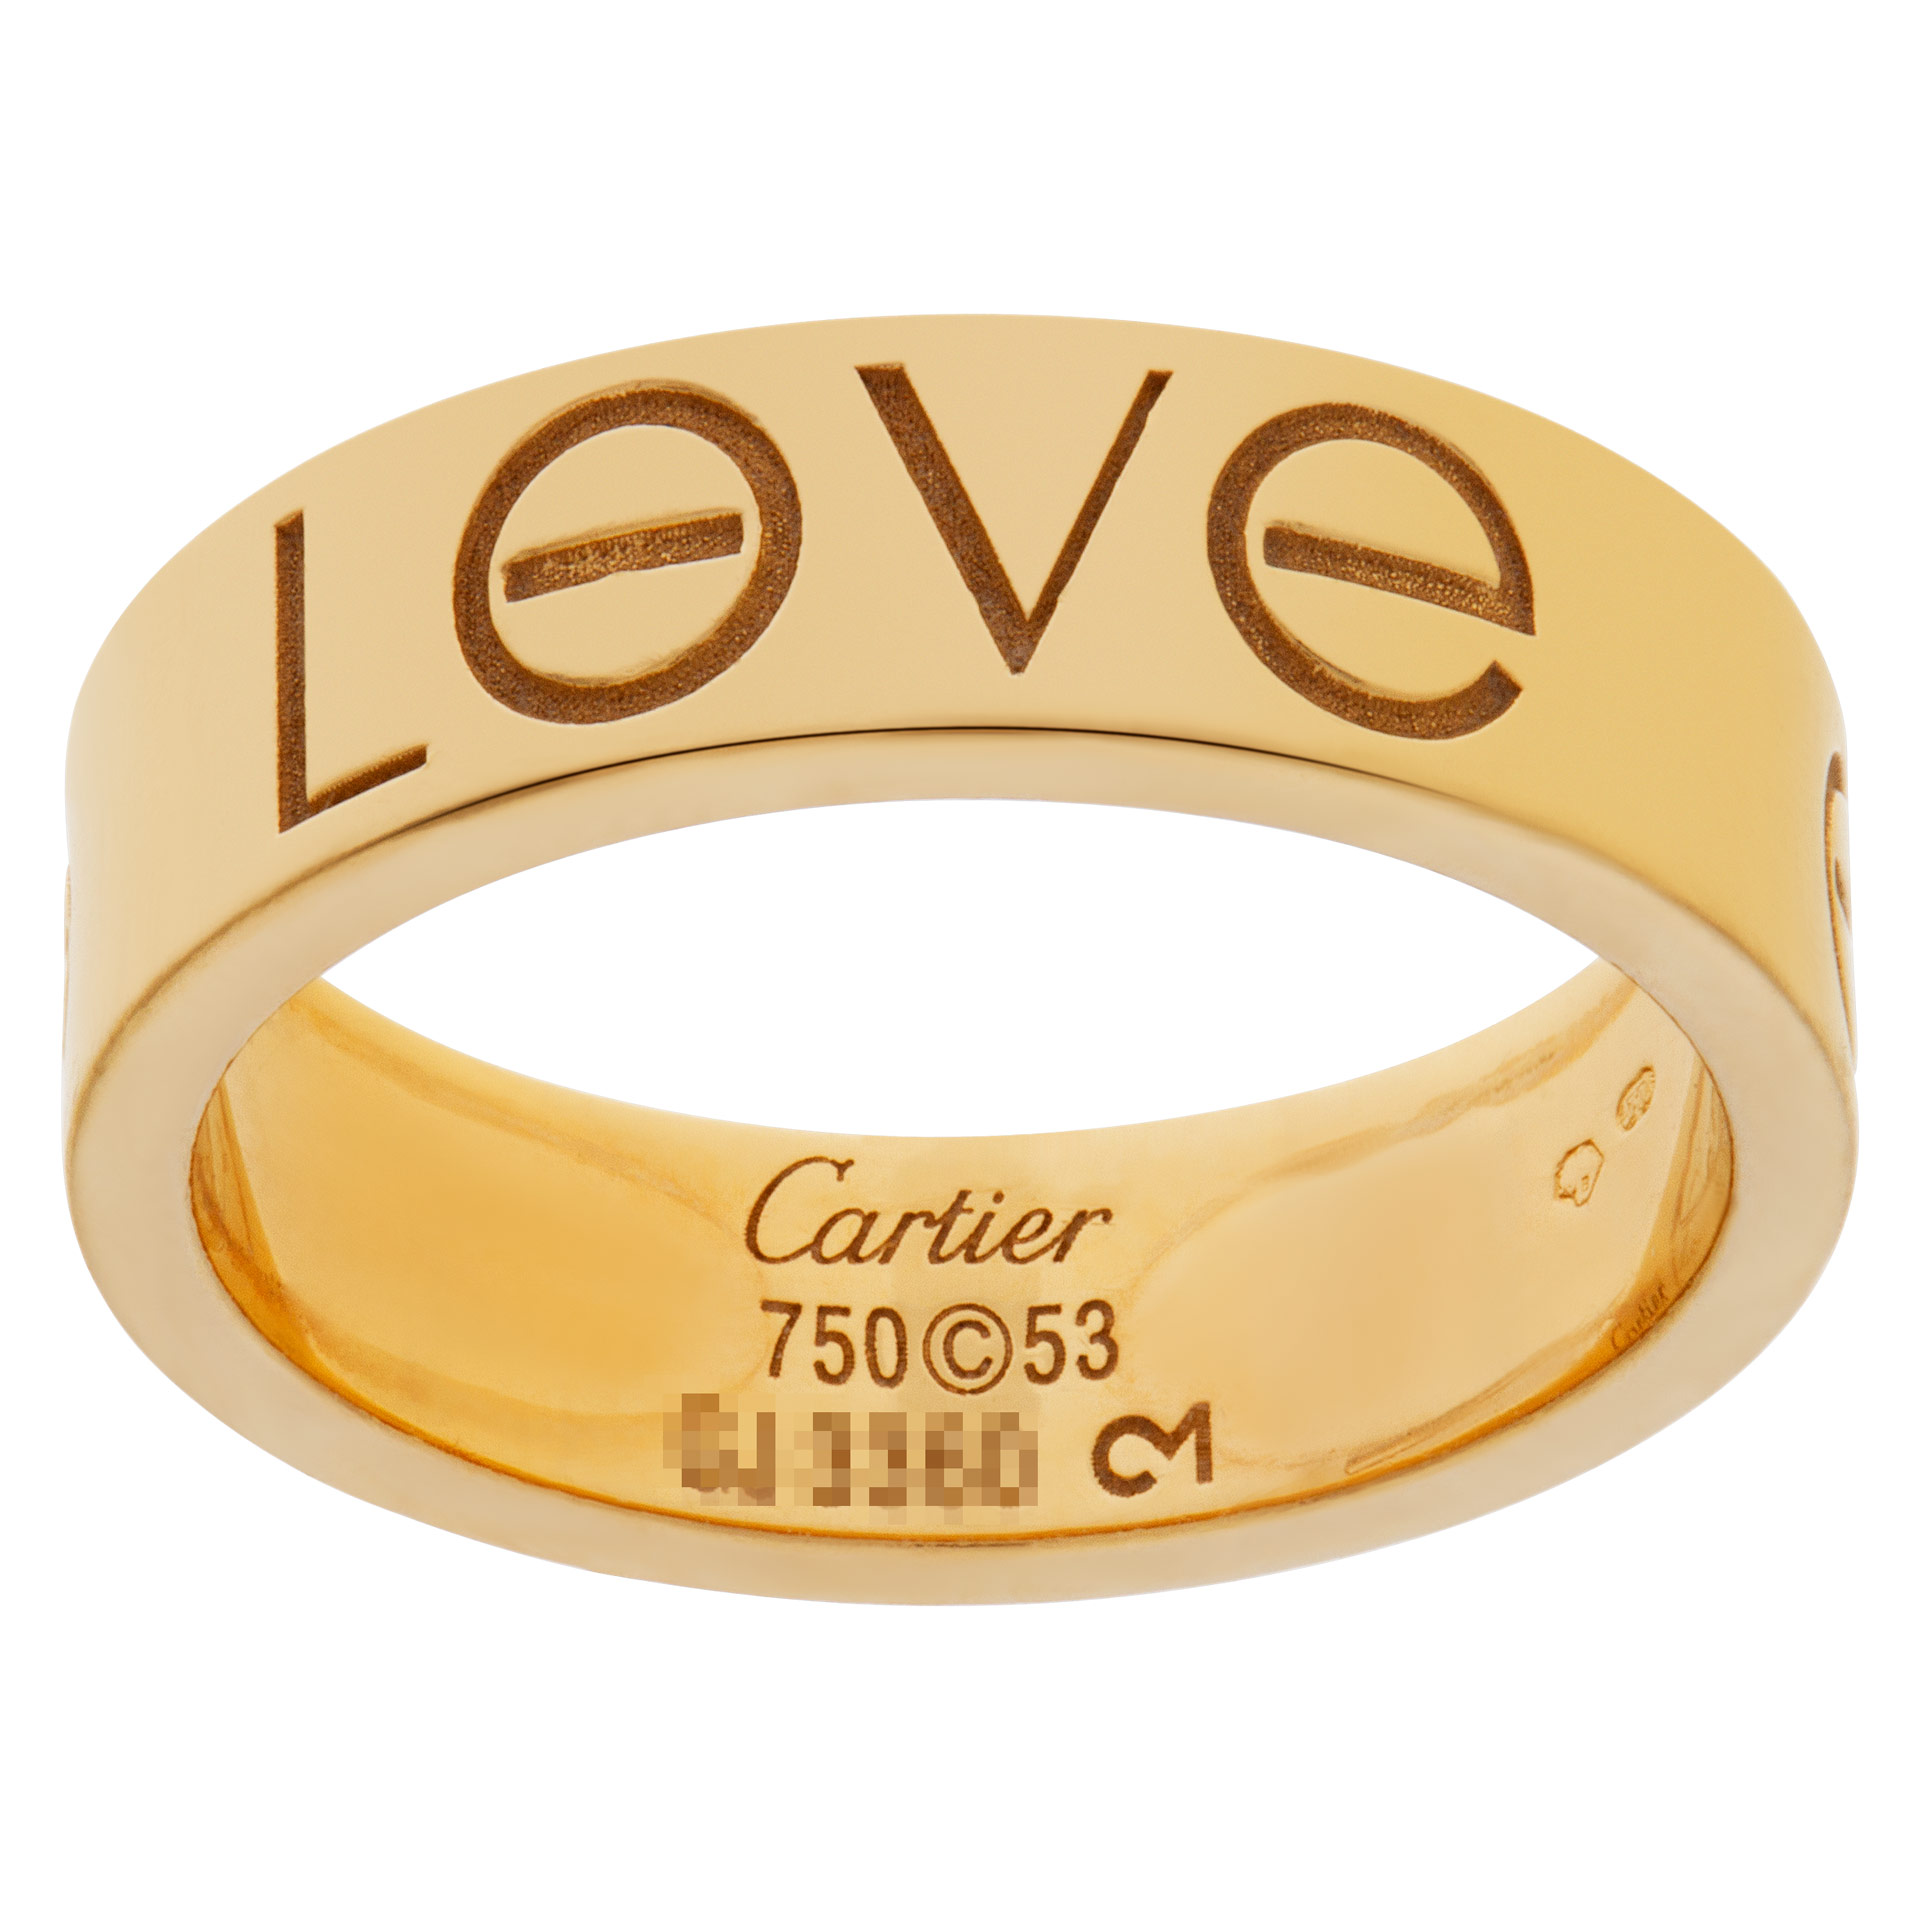 cartier ring size n